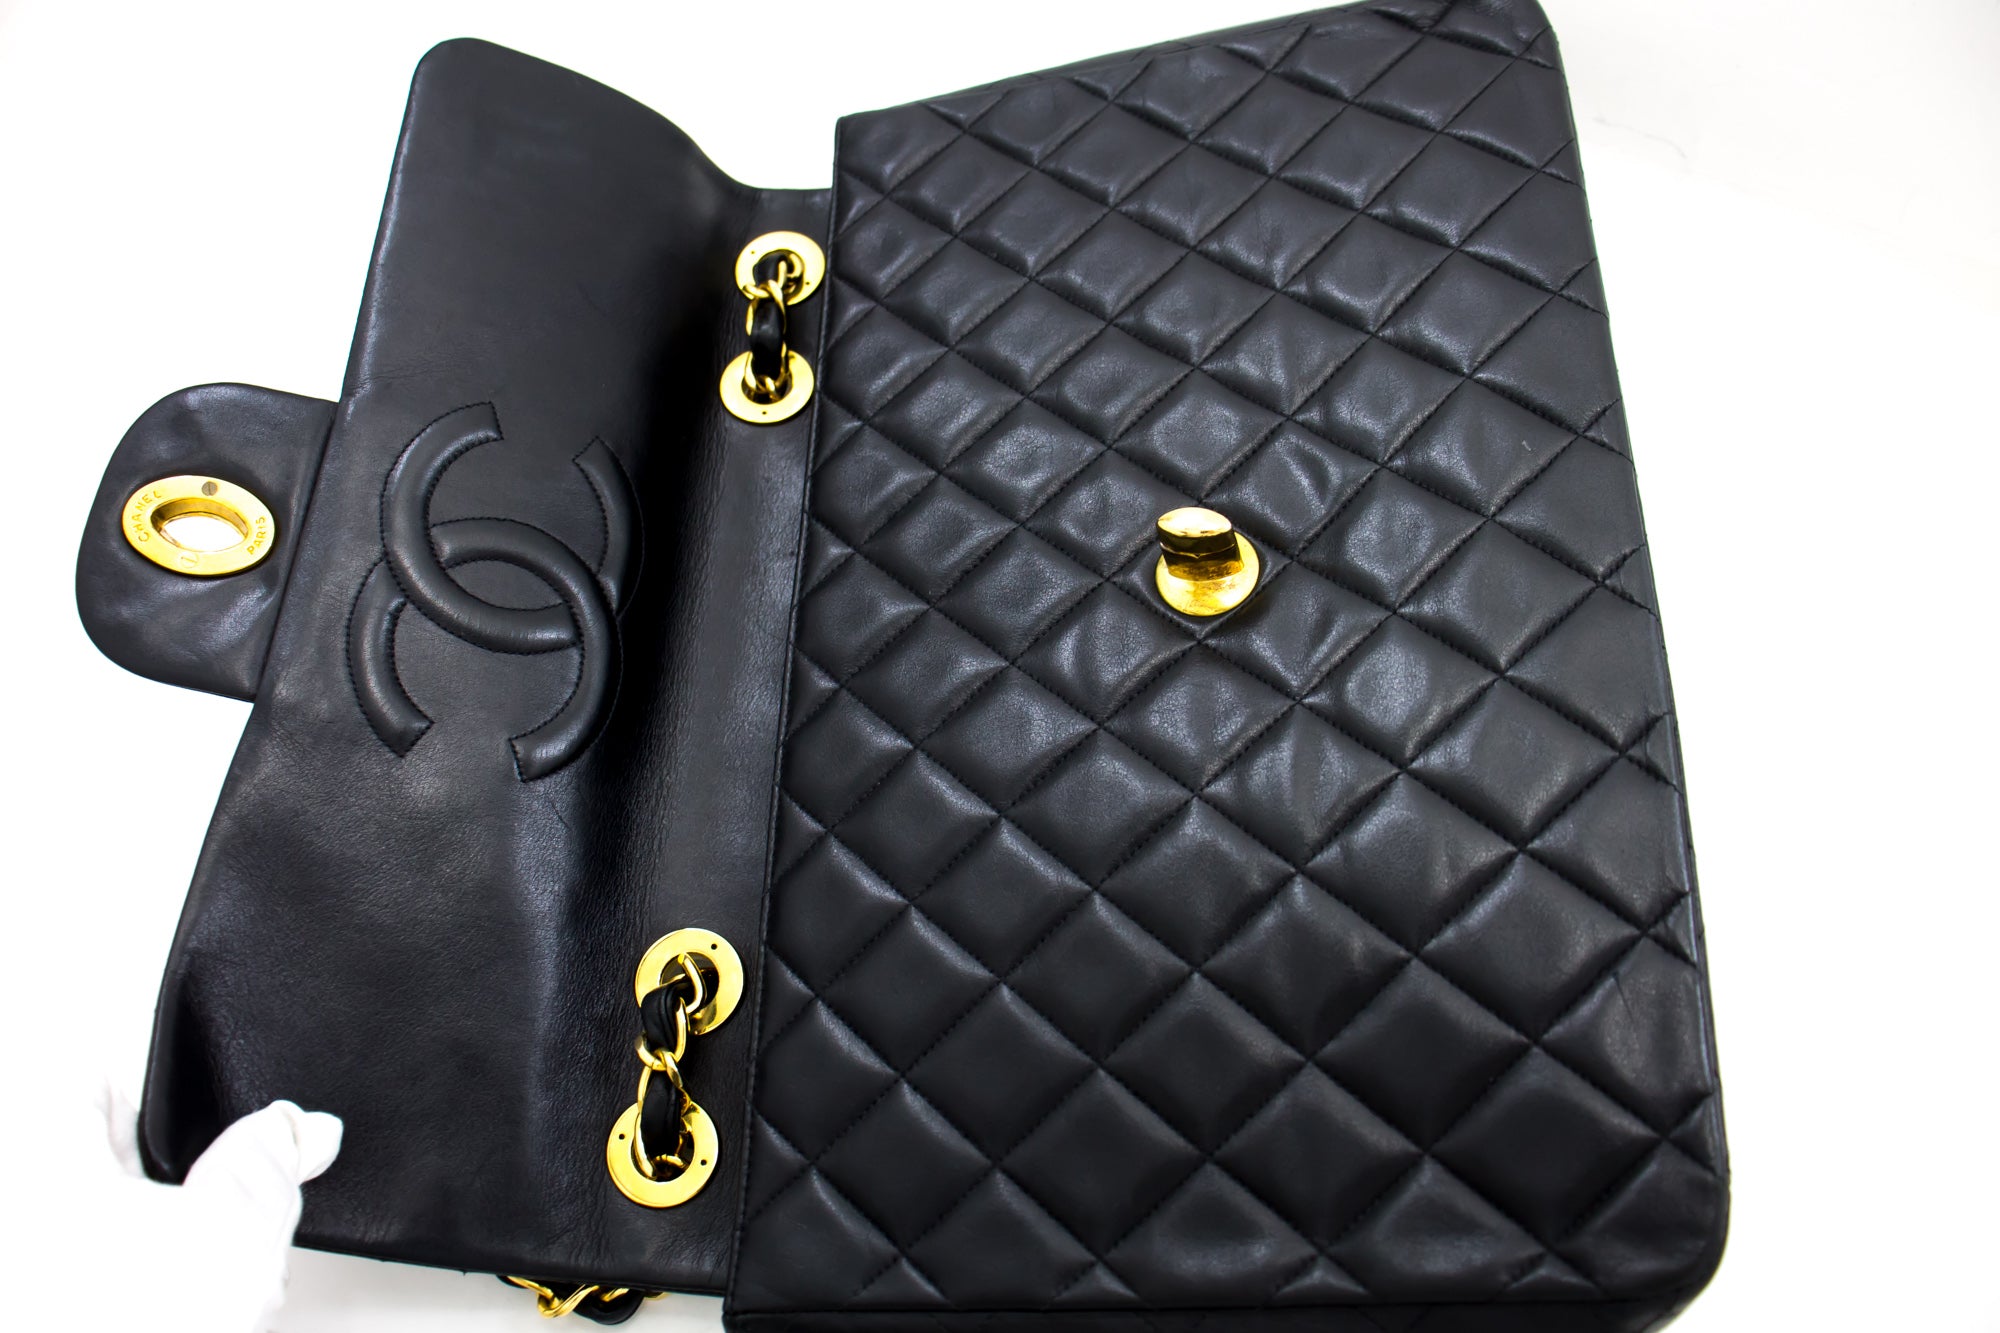 Chanel Classic Double Flap Quilted Lambskin Leather Jumbo Maxi Shoulder Bag